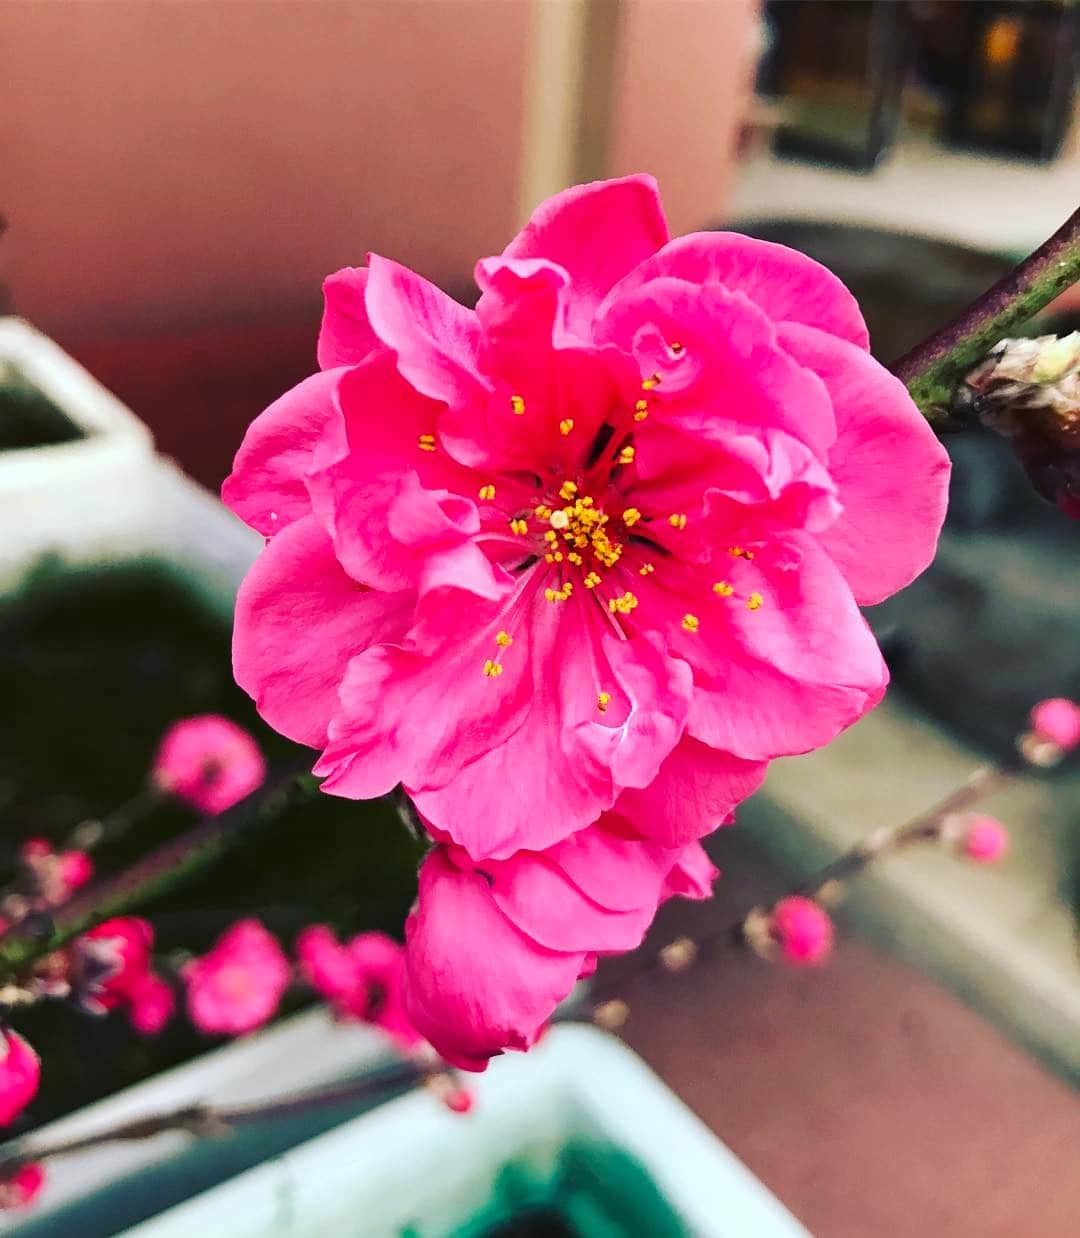 The Shun Jpのインスタグラム：「Happy Wednesday☺️✨with beautiful flower🌸🌸🌸 * #spring #springflowers #happyflower #beautifulflowers #haveaniceday #shiokjapan」